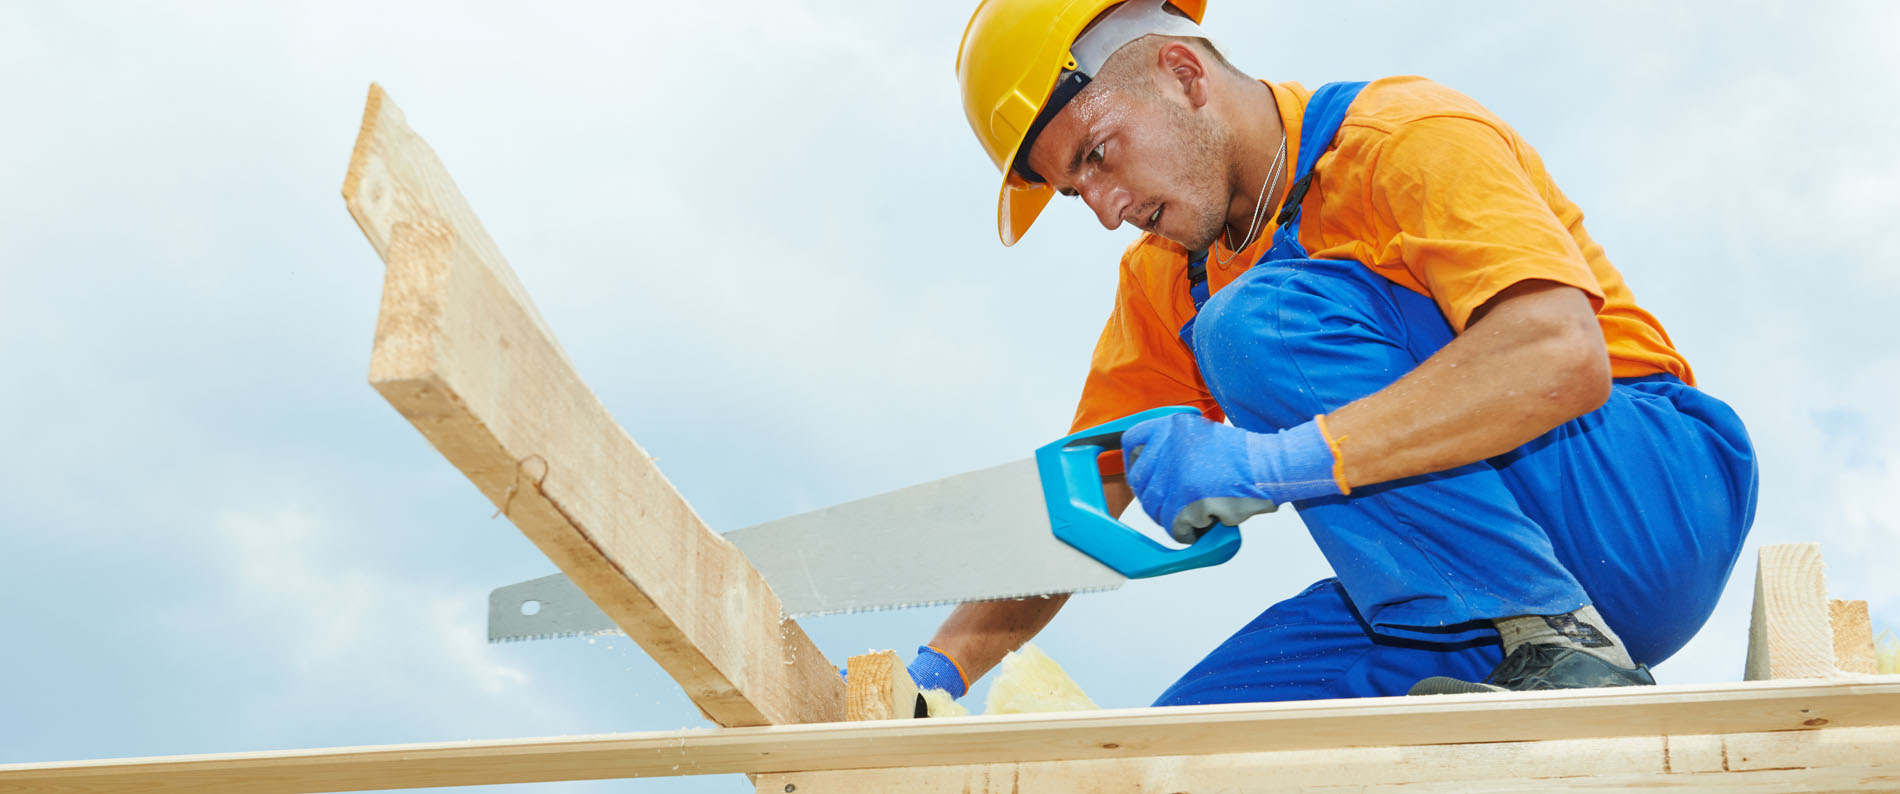 Home construction carpenter jobs in frederick md